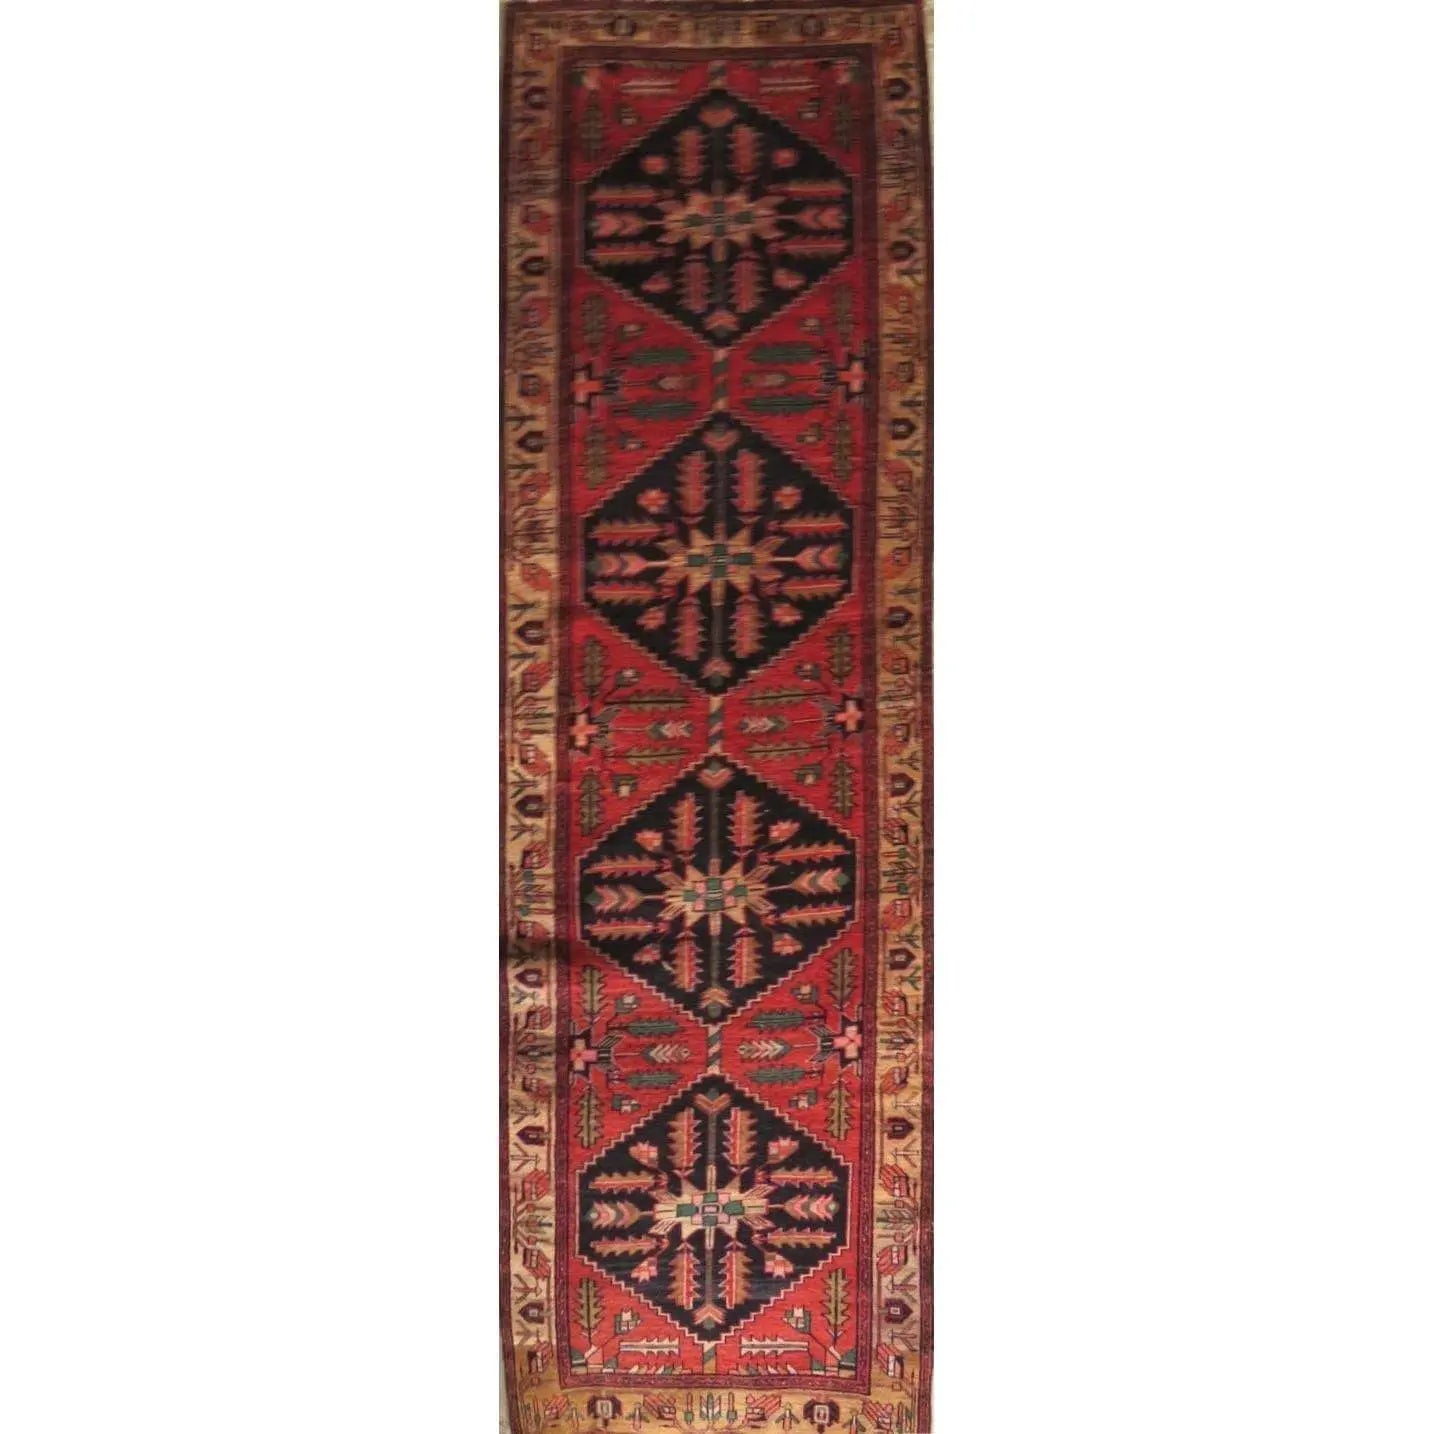 Hand-Knotted Persian Wool Rug _ Luxurious Vintage Design, 13'7" x 3'5", Artisan Crafted